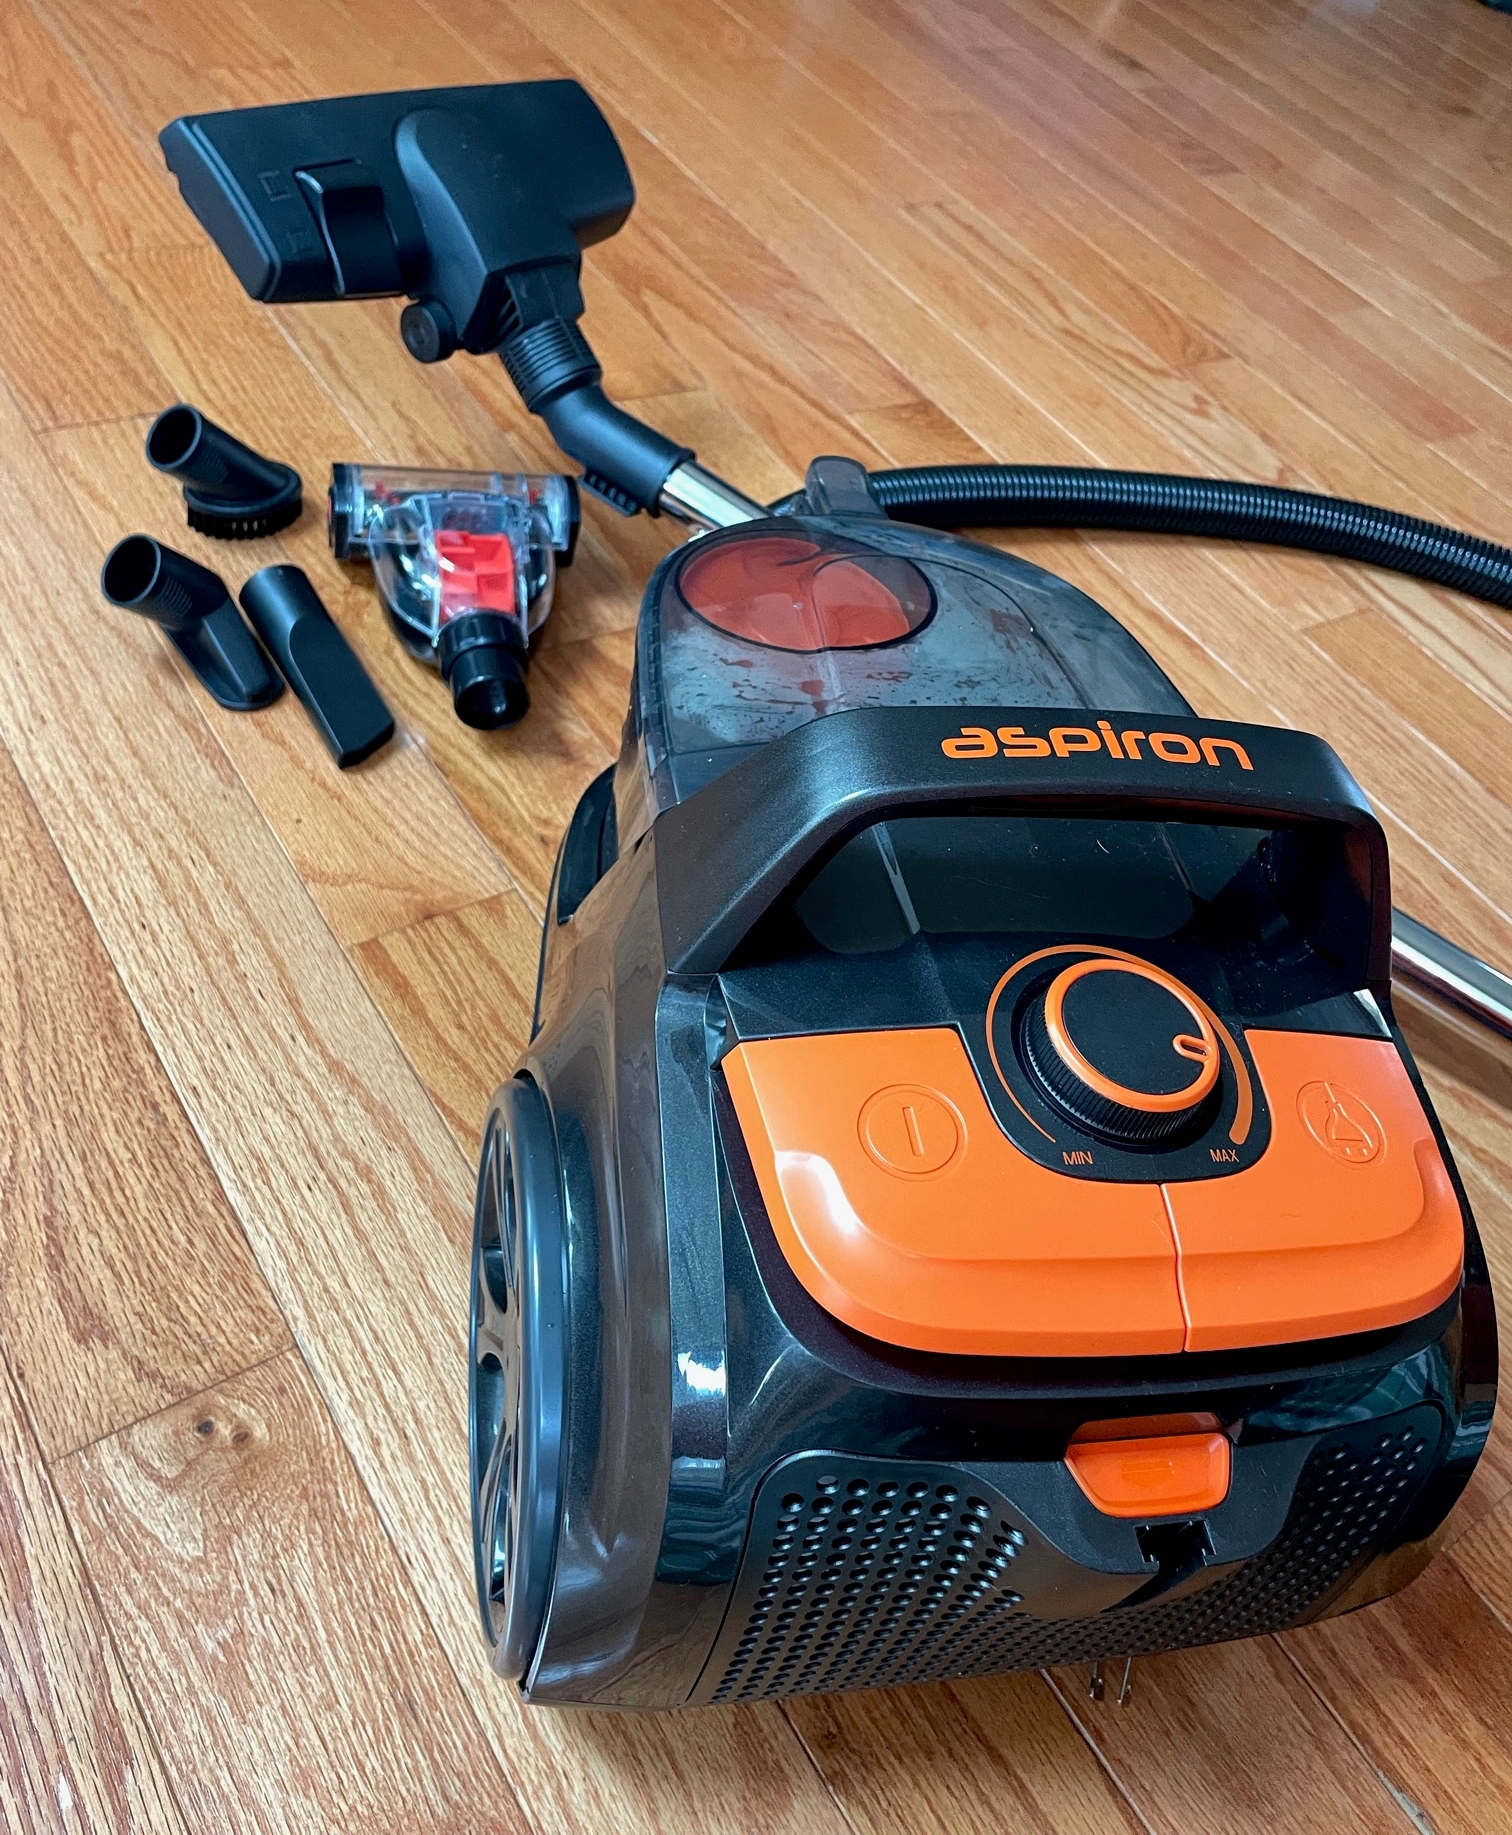 This Electric Spin Scrubber Will Banish Grime in Your Home